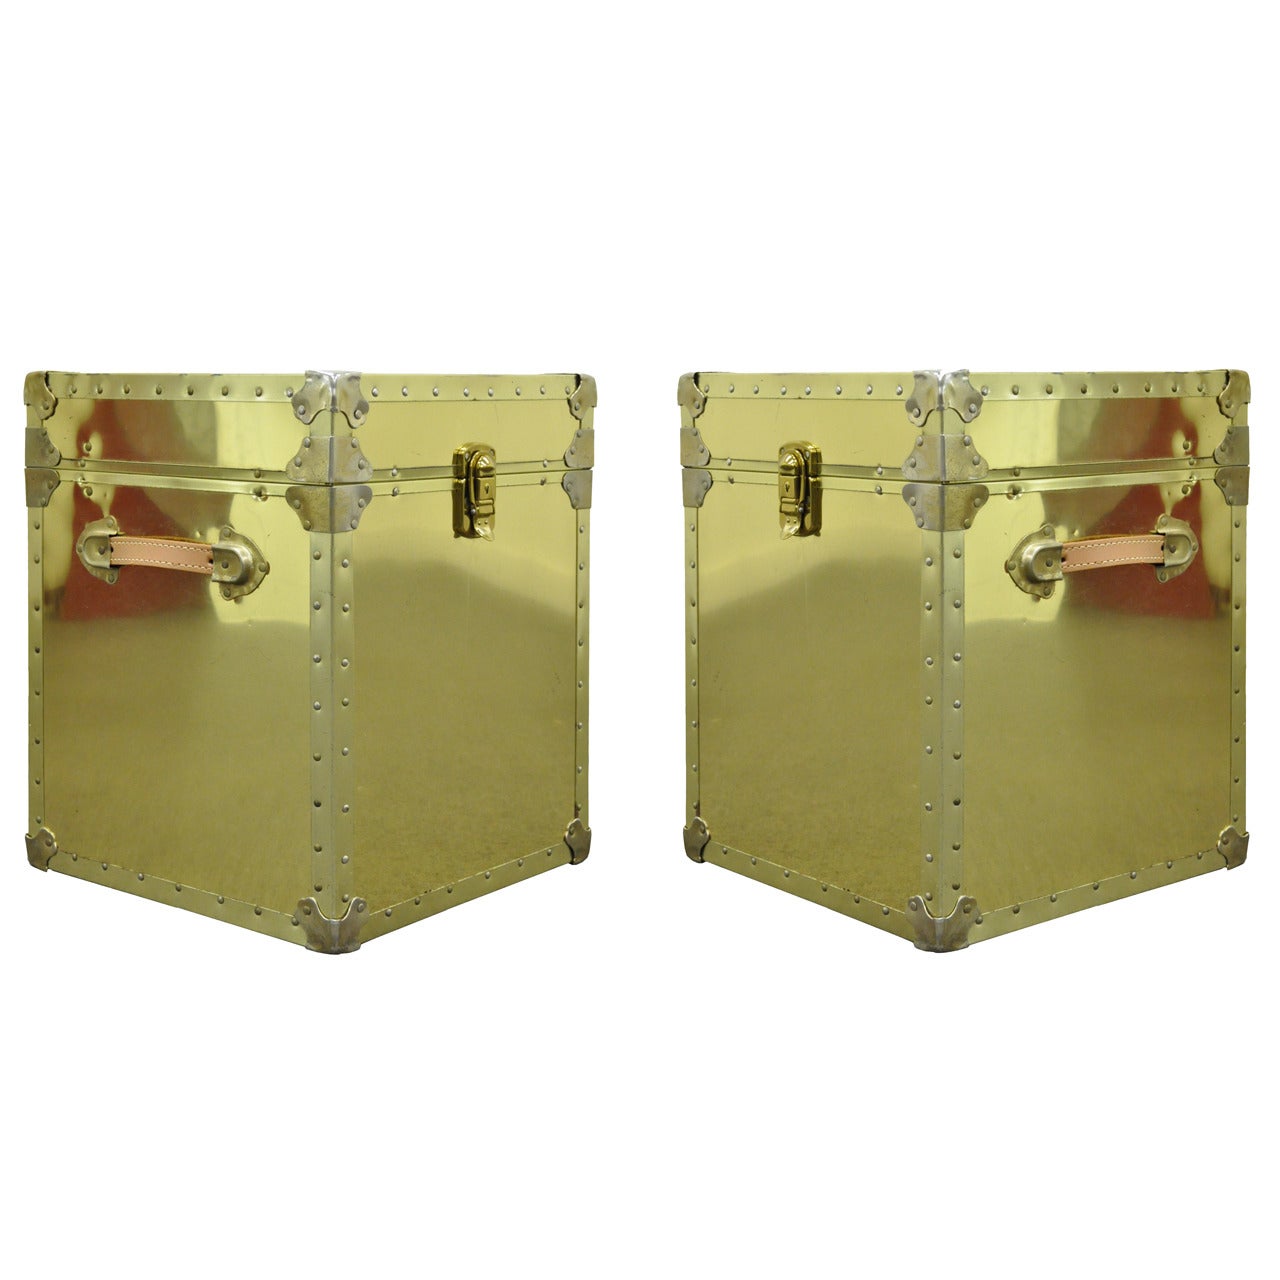 Pair of Hollywood Regency Brass Clad Trunks Chest Side Tables by Luggage Gallery